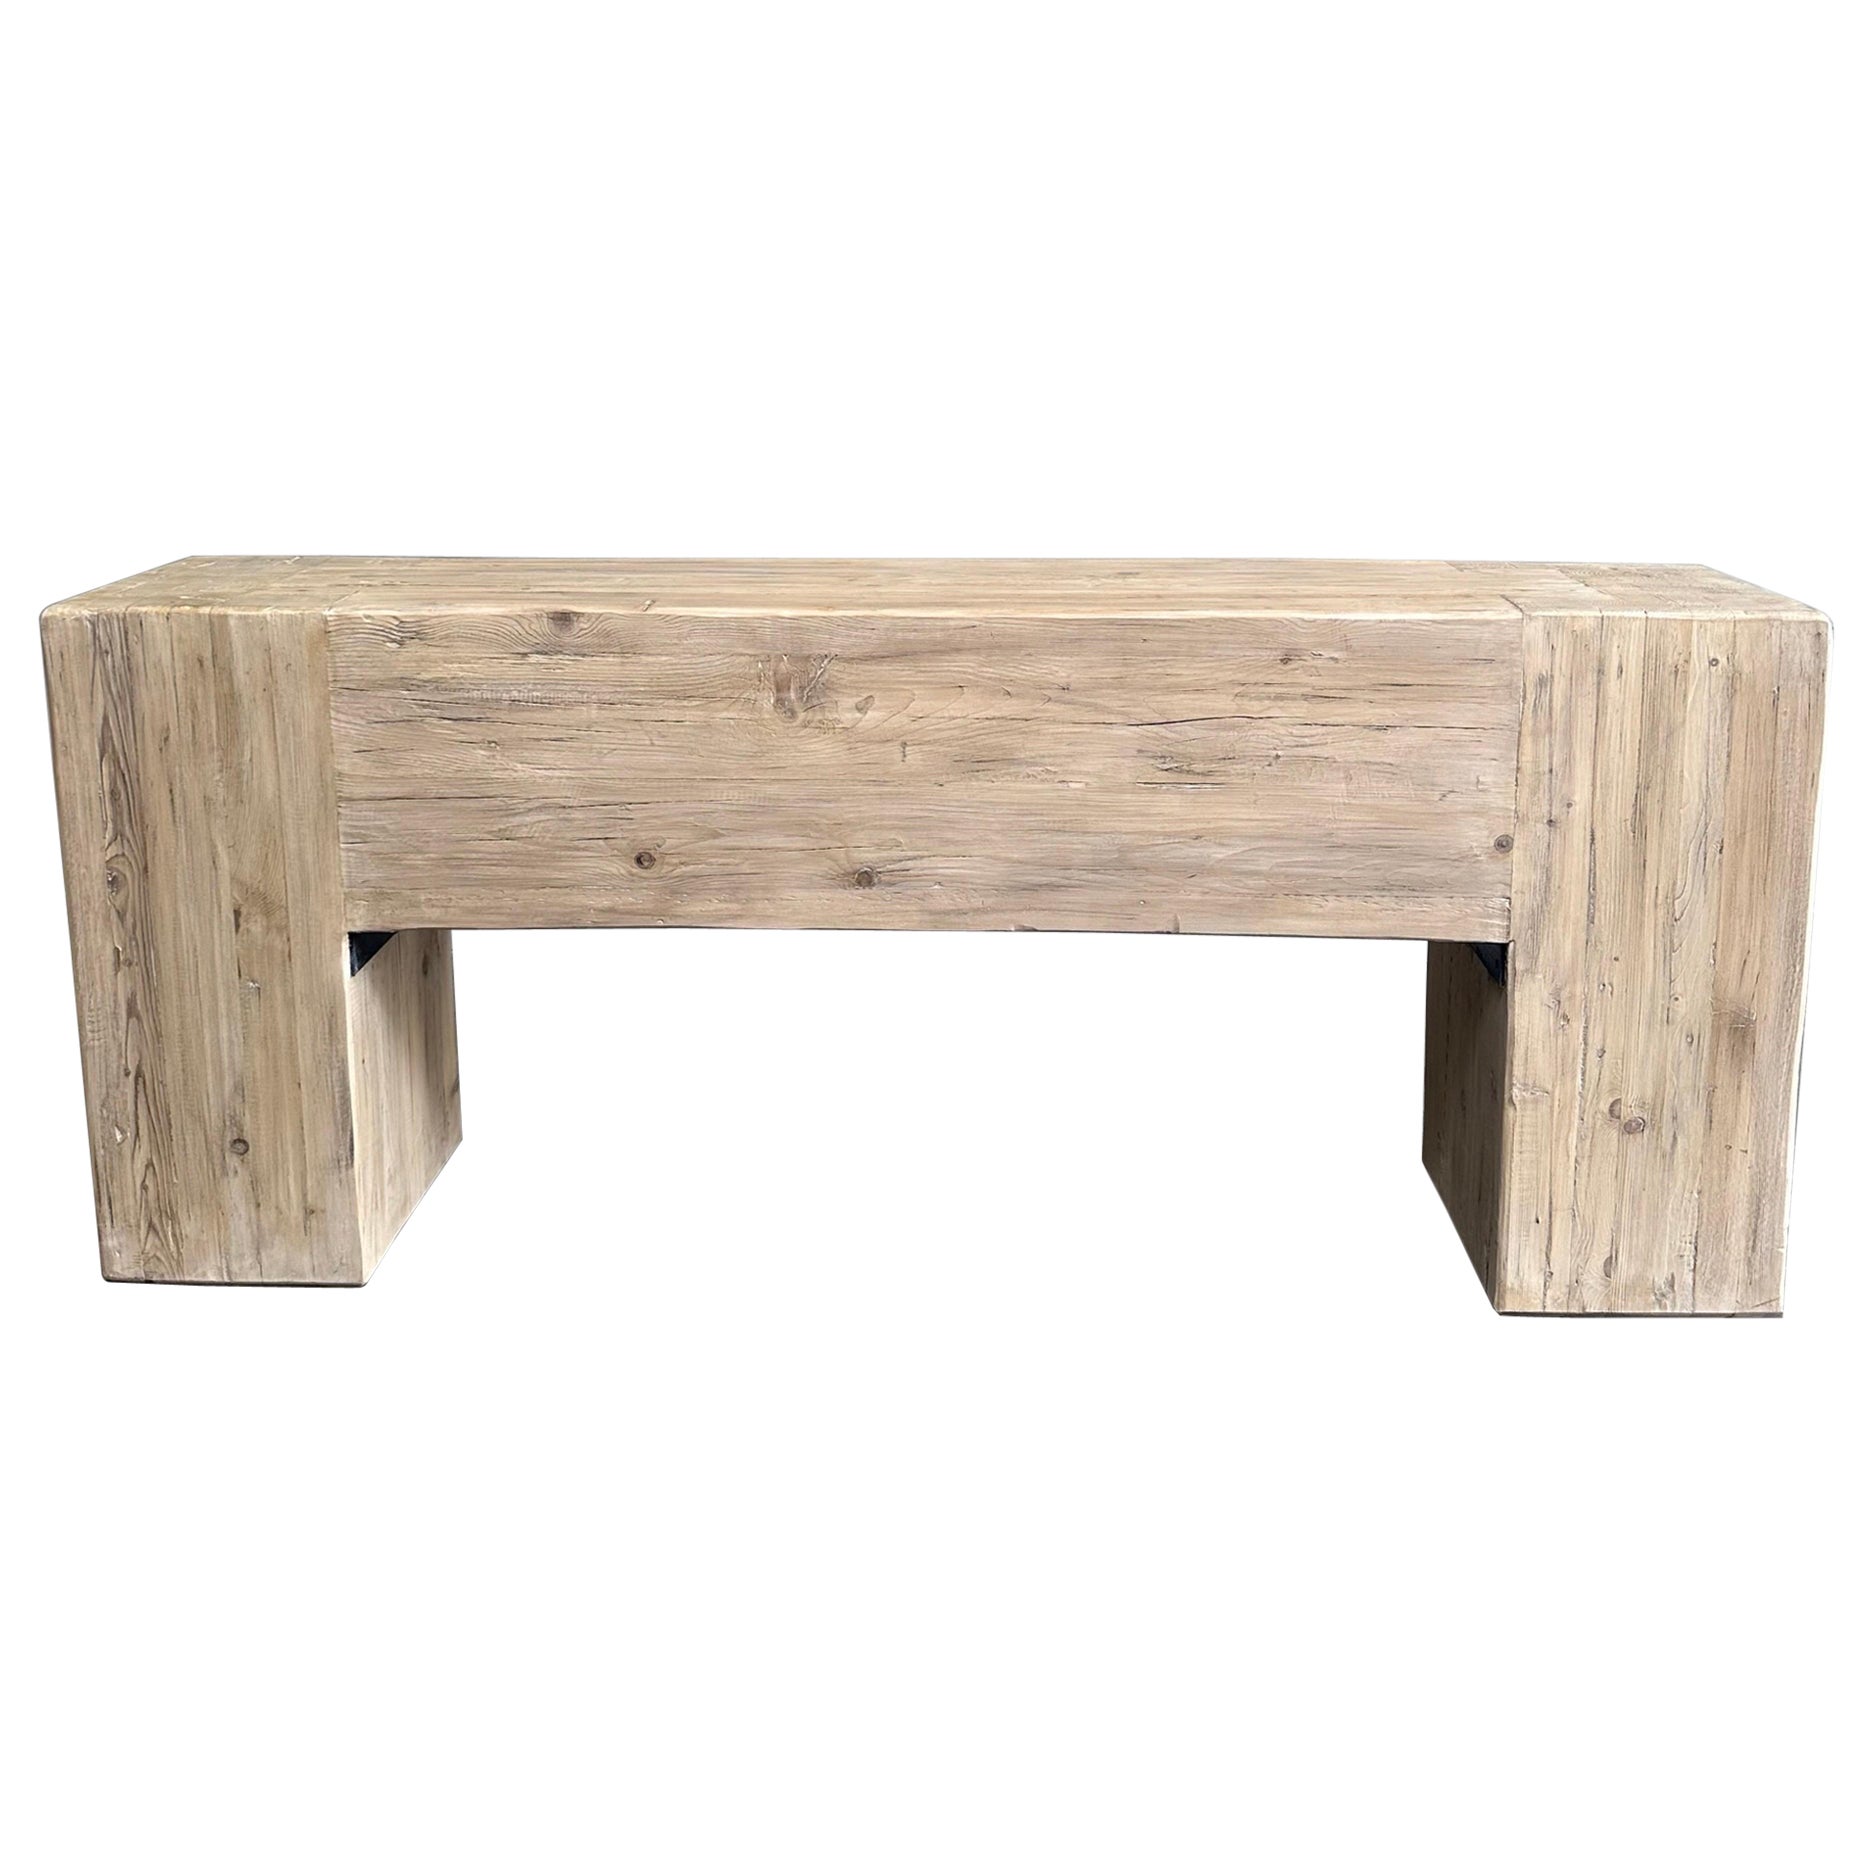 Natural Wood Beam Console Table Short Length For Sale